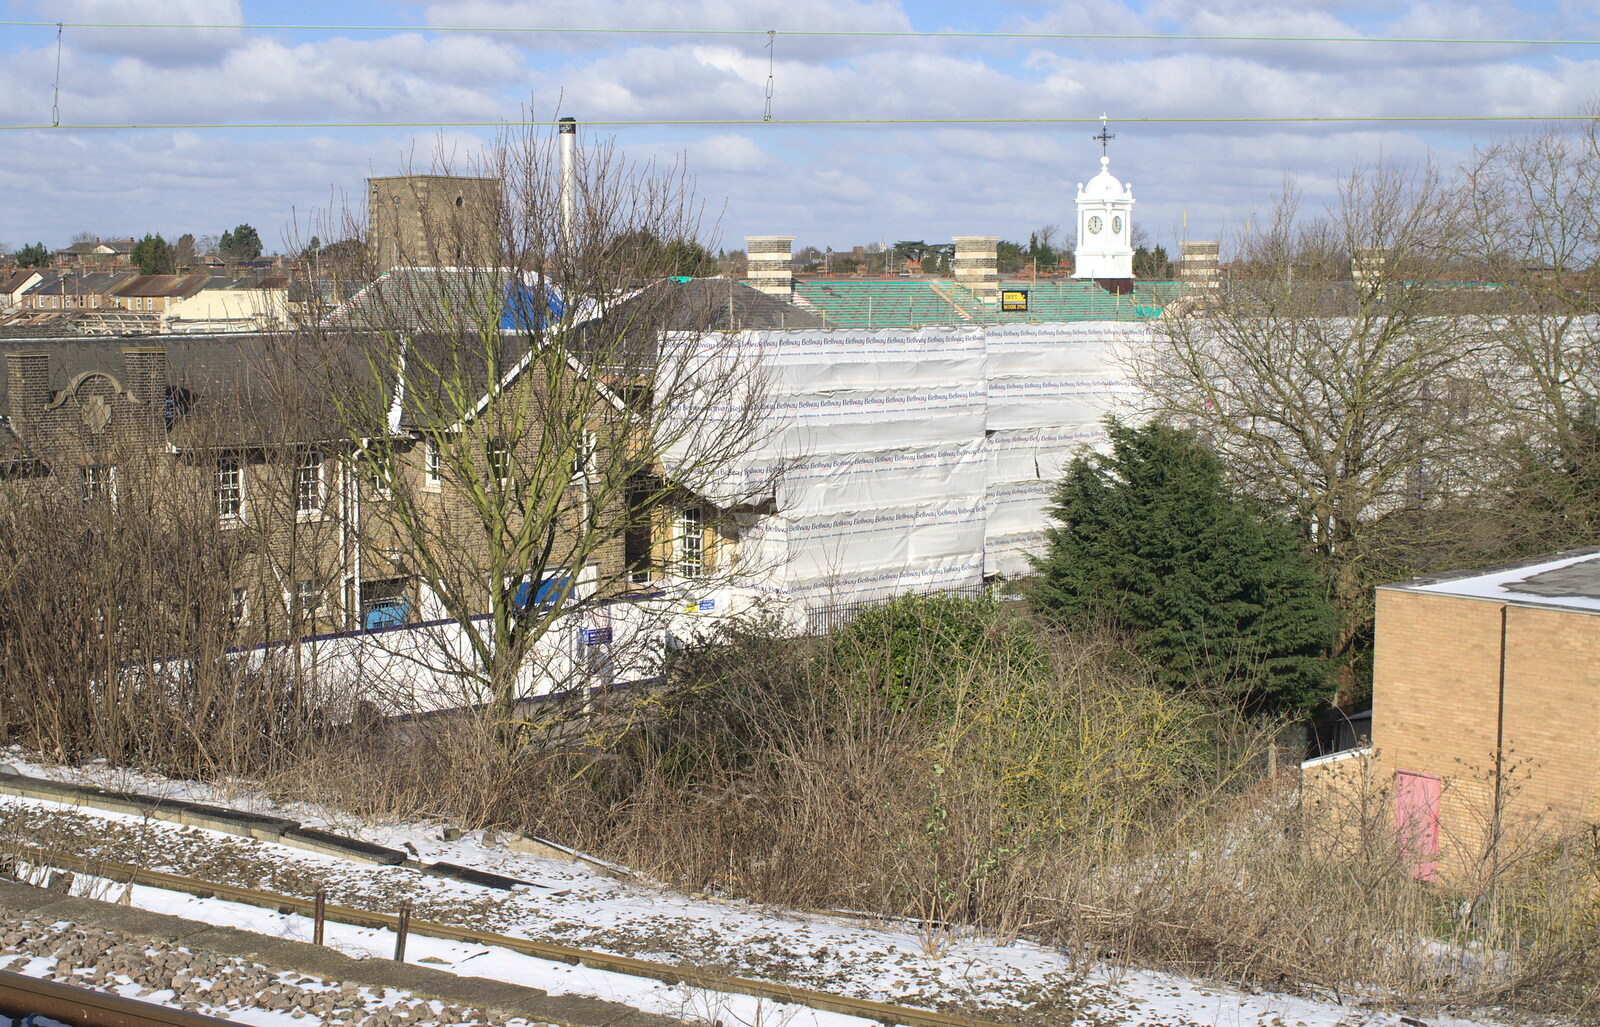 The New Street factory entrance is covered up from Bramford Dereliction and Marconi Demolition, Chelmsford - 12th March 2013